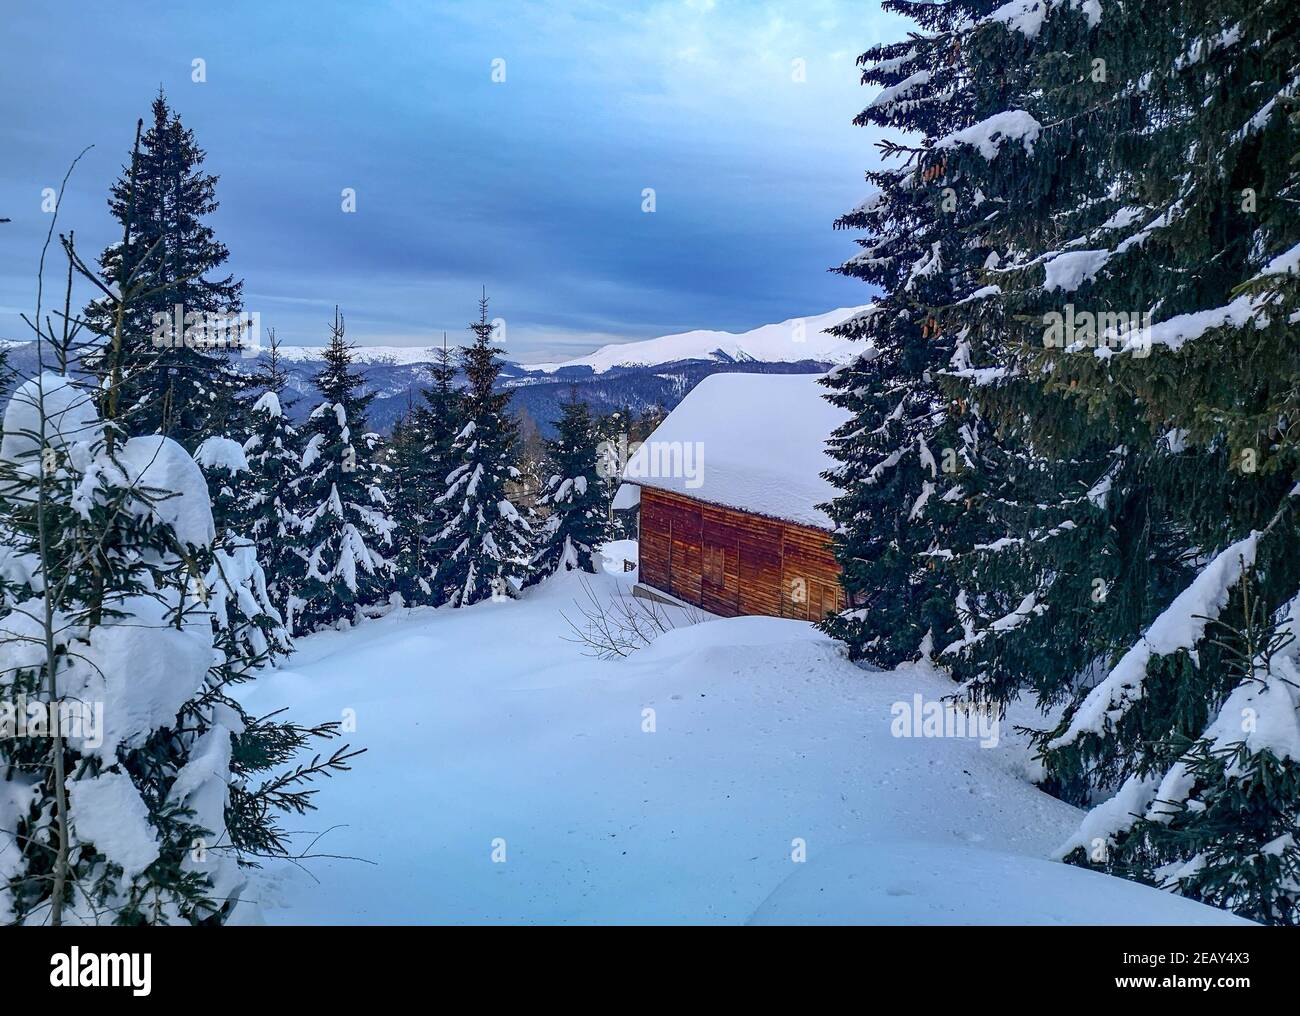 Small wooden lodge or cabana covered in snow, surrounded by icy evergreens overlooking the Carpathian Mountains, winter landscape in Ranca, Romania Stock Photo